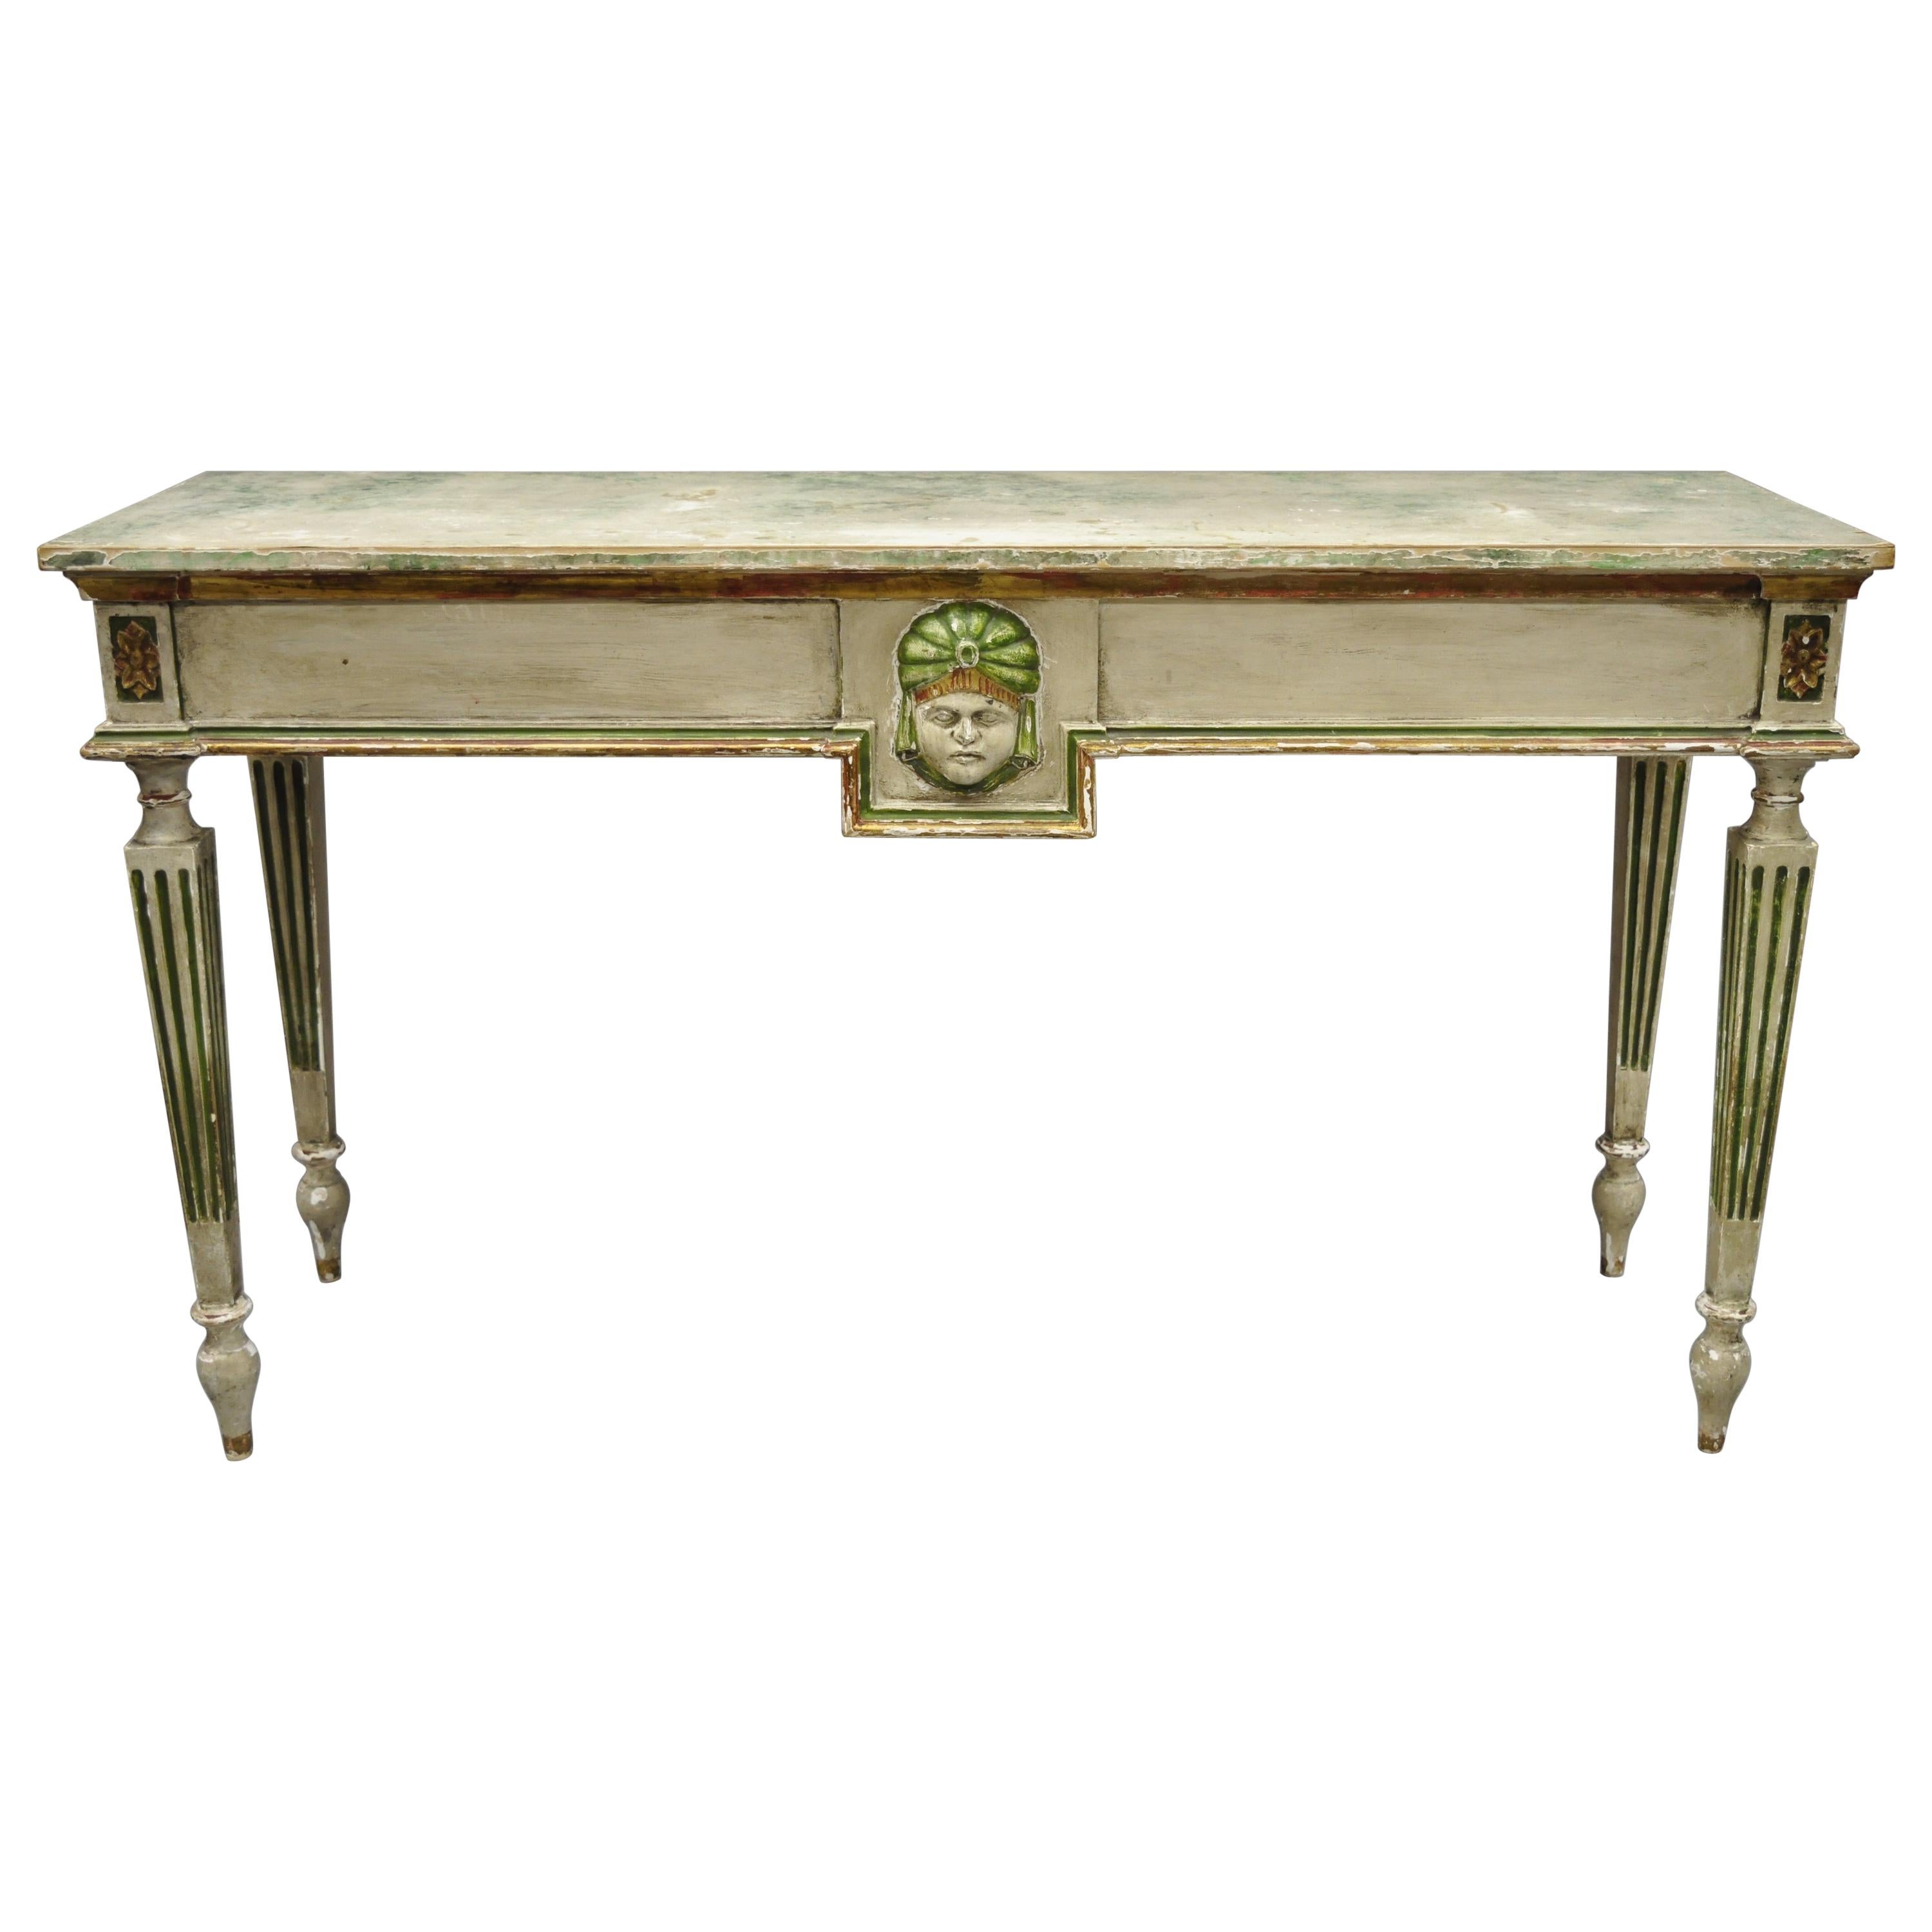 French Neoclassical Continental Distress Painted Figural Console Table with Face